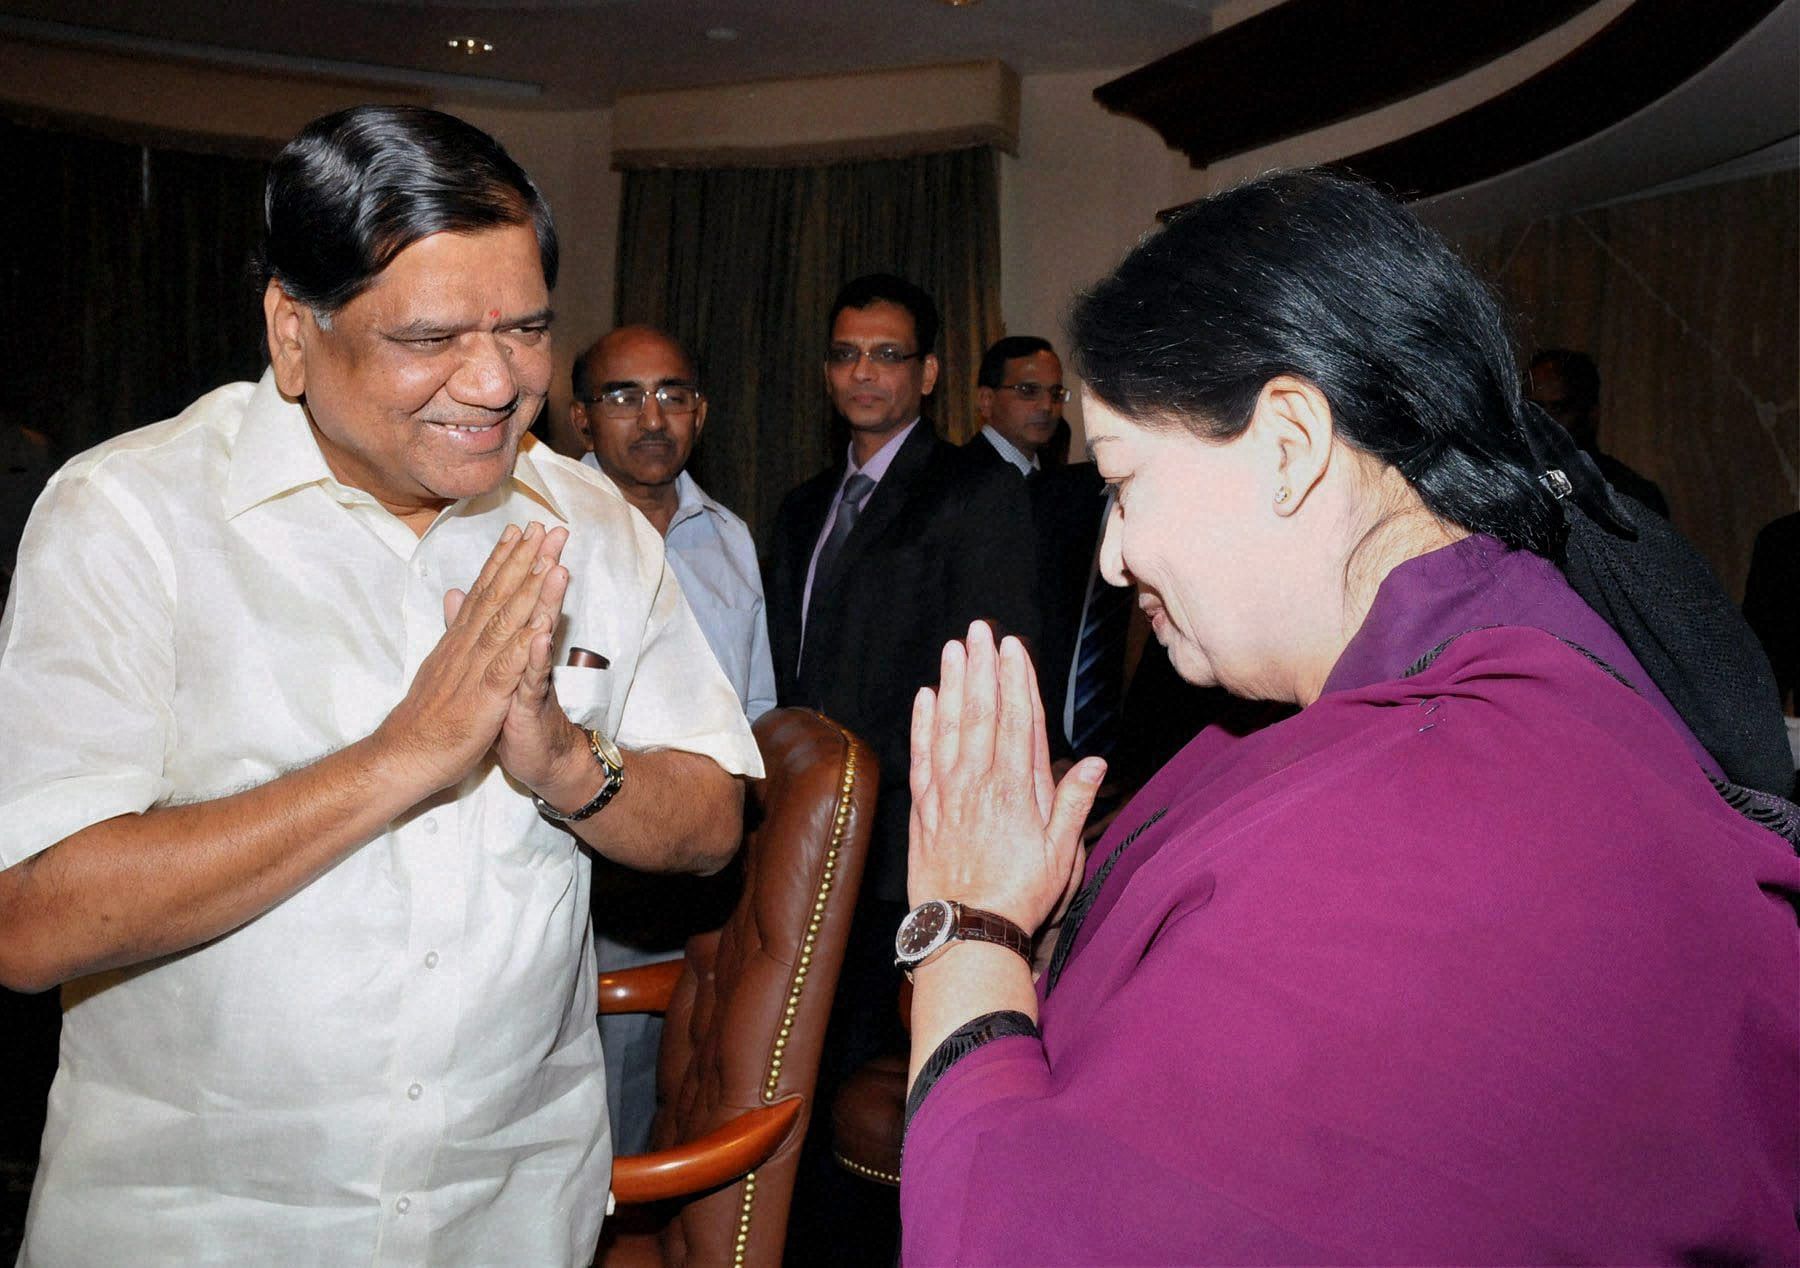 Tamil Nadu Chief Minister J Jayalalithaa and her Karnataka counterpart Jagadish Shettar exchange greetings during a meeting on the Cauvery water sharing issue in Bengaluru on Thursday. PTI Photo